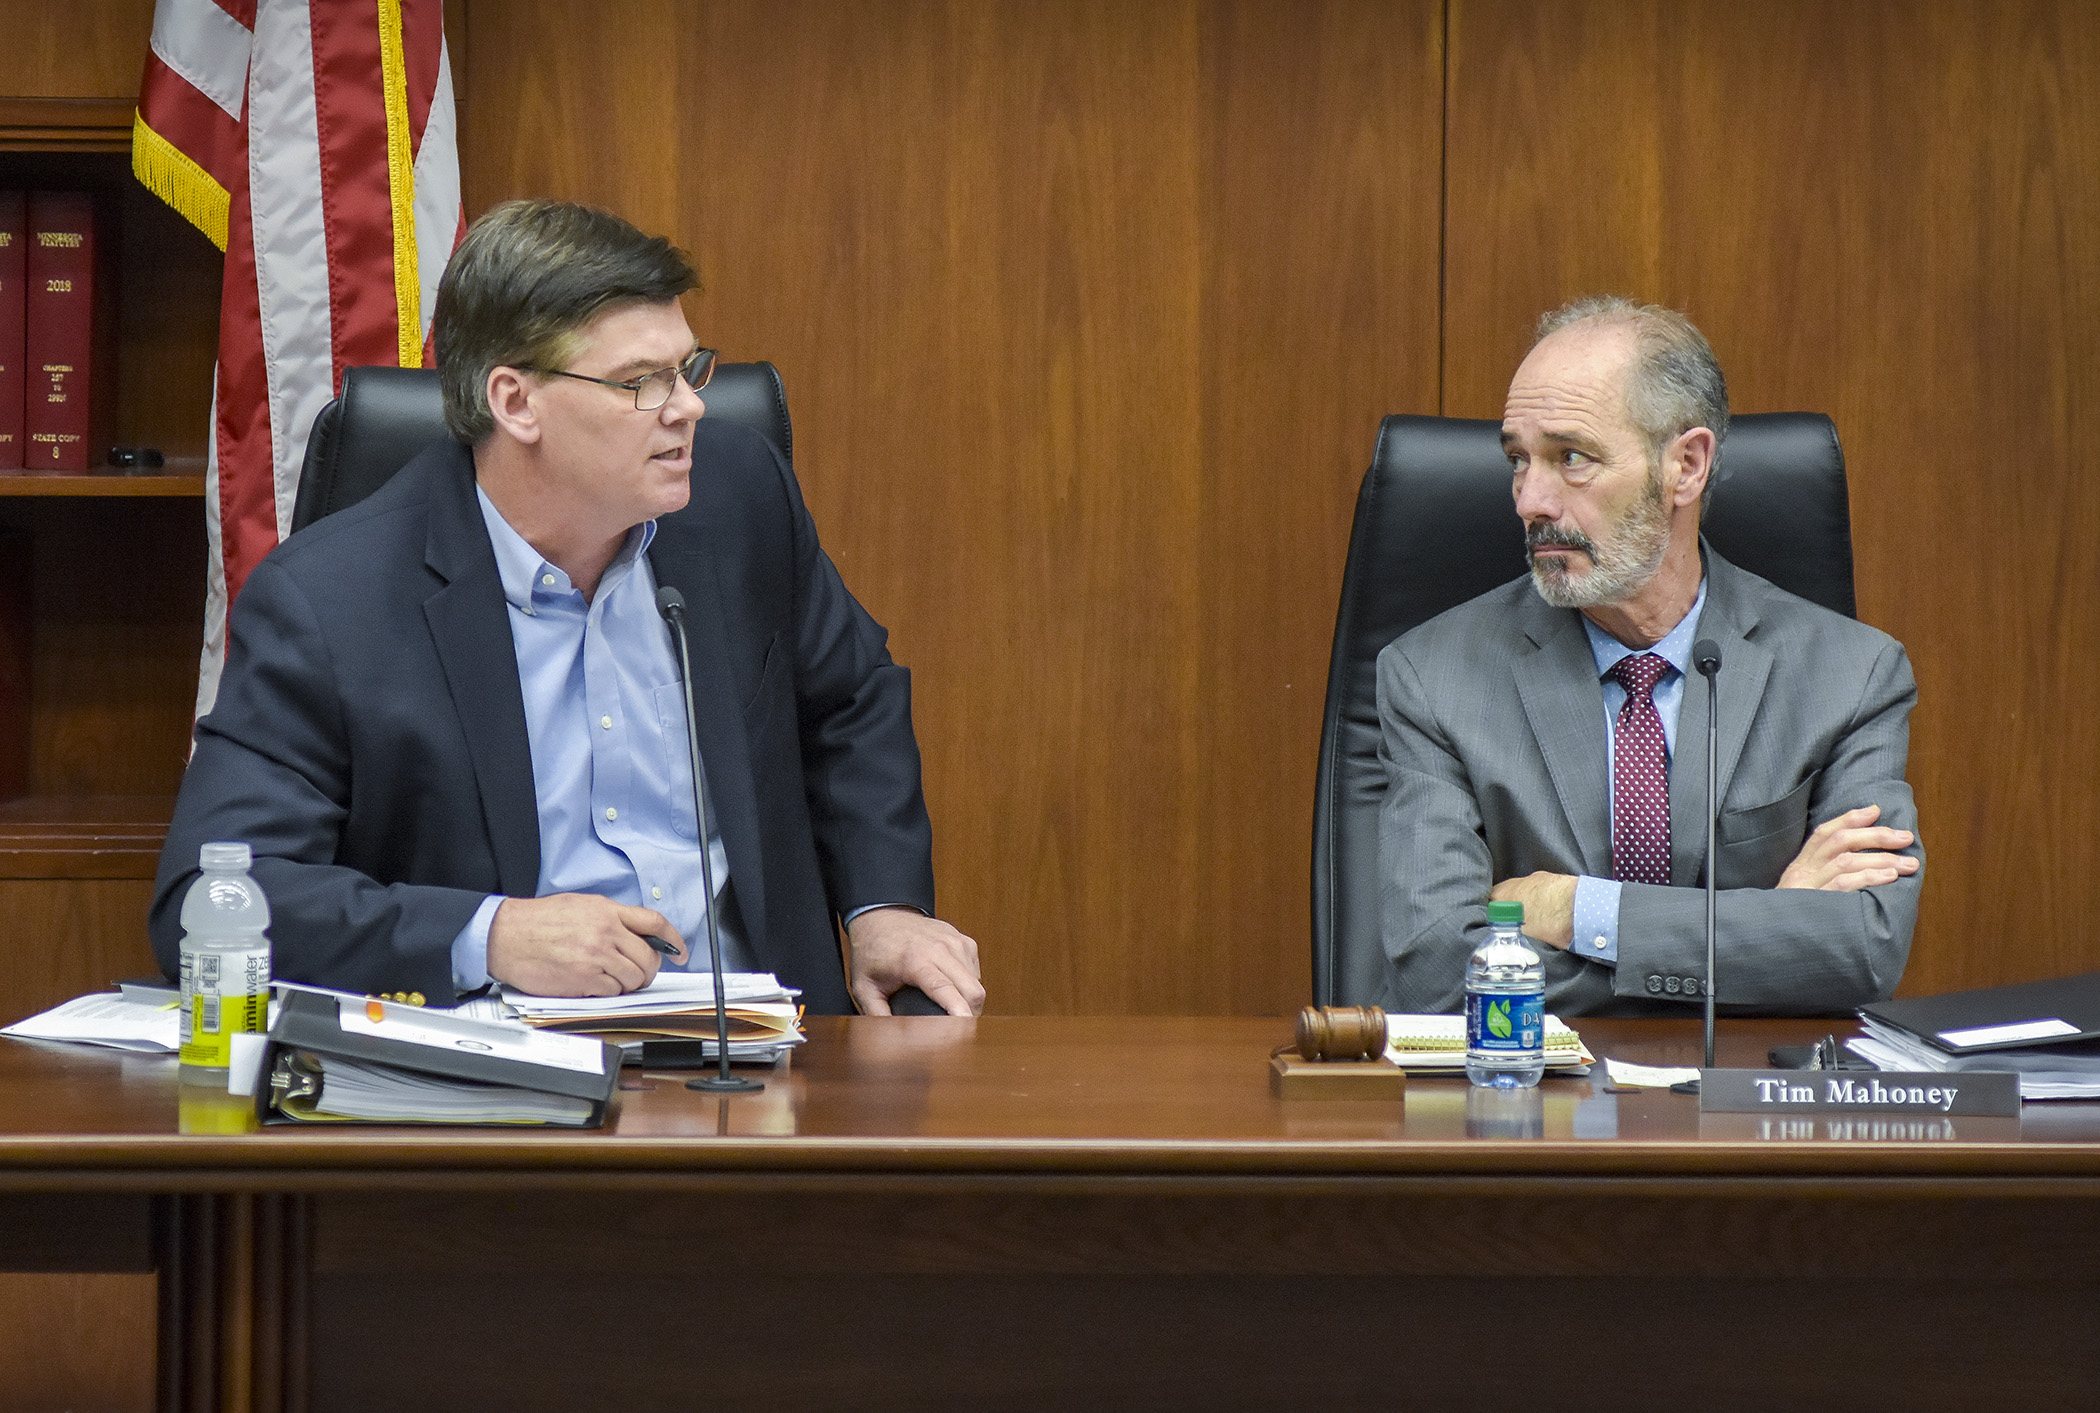 Sen. Eric Pratt and Rep. Tim Mahoney begin the conference committee for the omnibus jobs and economic development, energy and climate, and telecommunications policy and finance bill by discussing why the meeting was taking place. Photo by Andrew VonBank